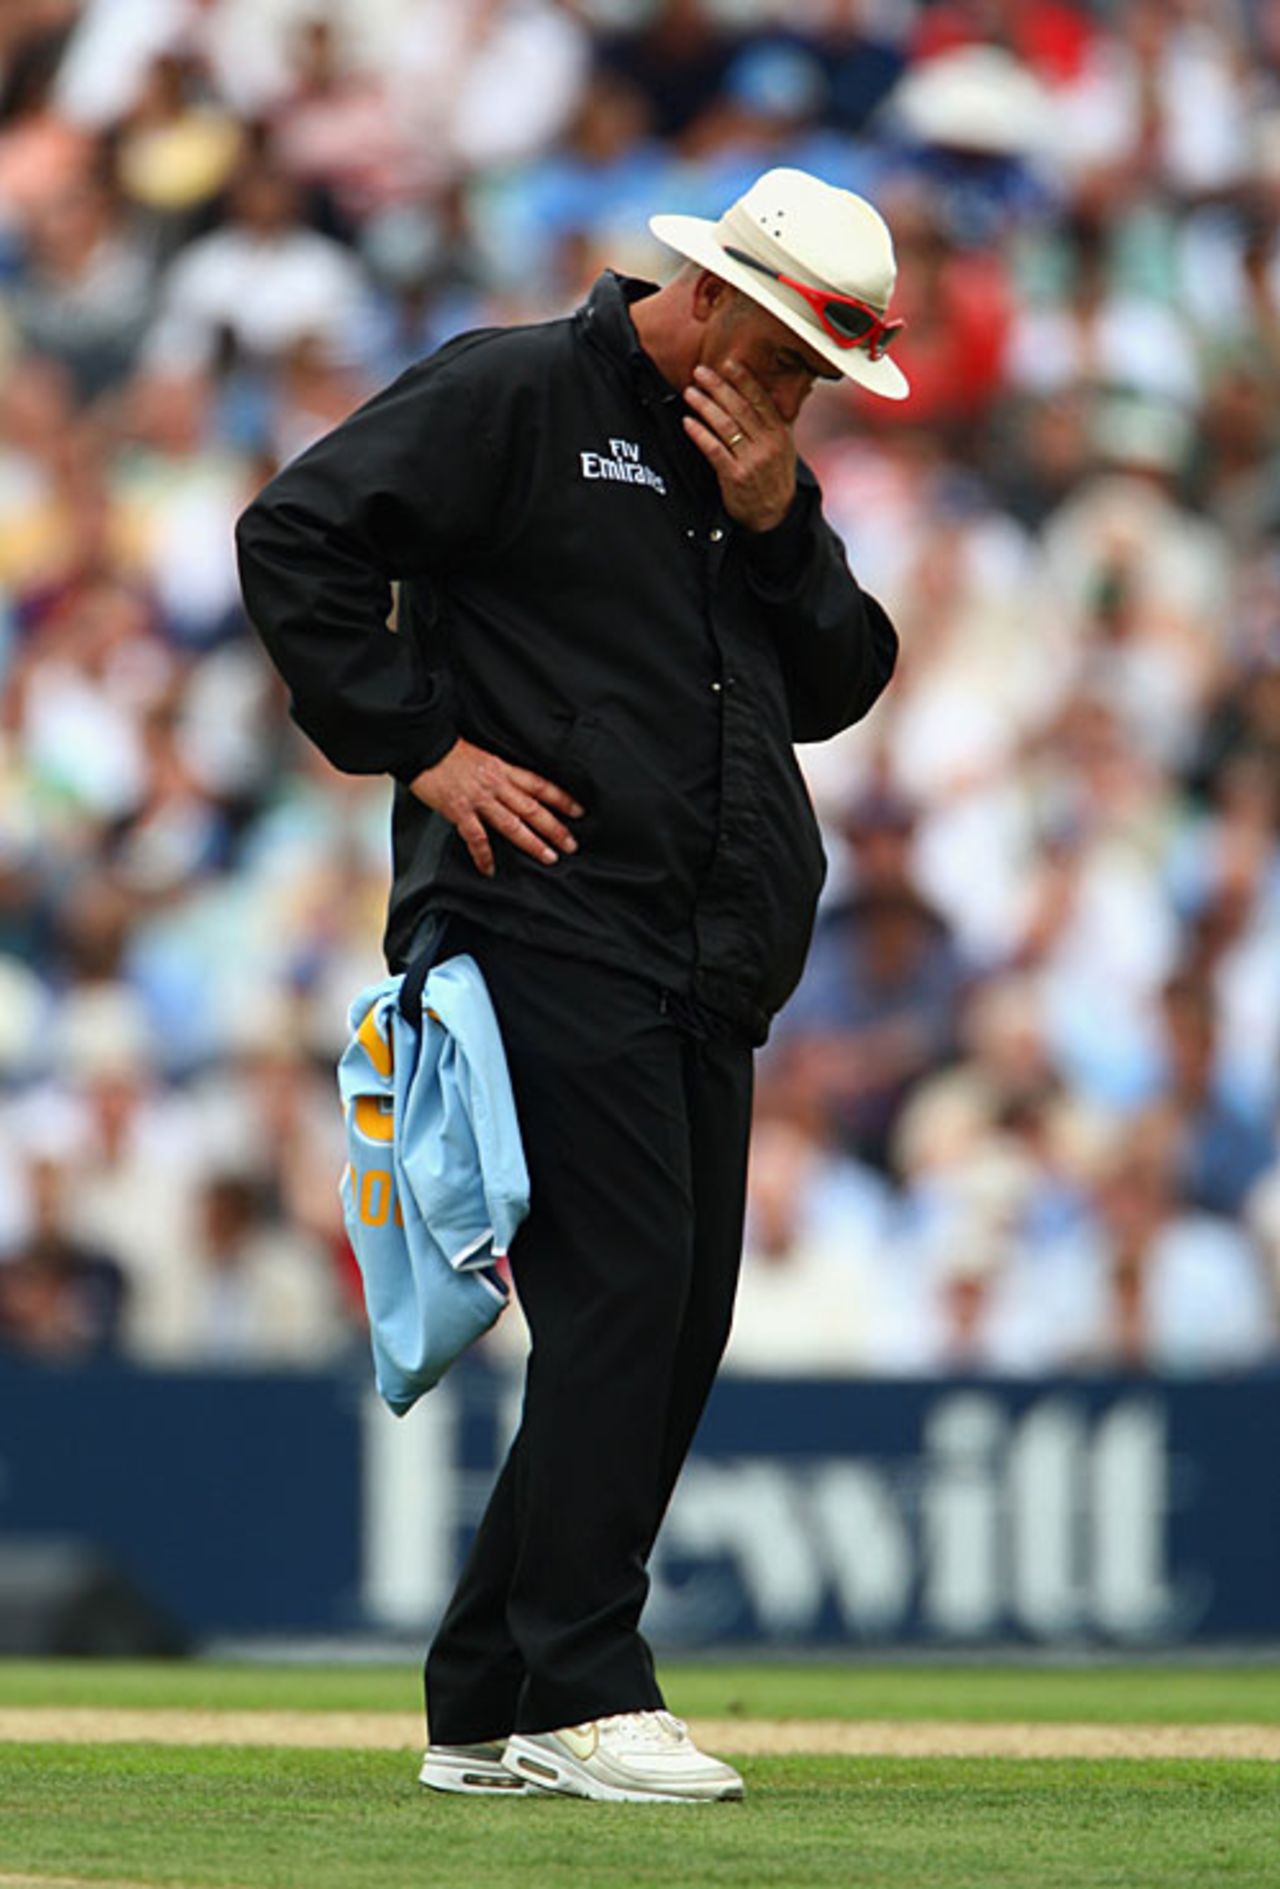 Peter Hartley was standing in his first one-day international, England v India, 6th ODI, The Oval, September 5, 2007